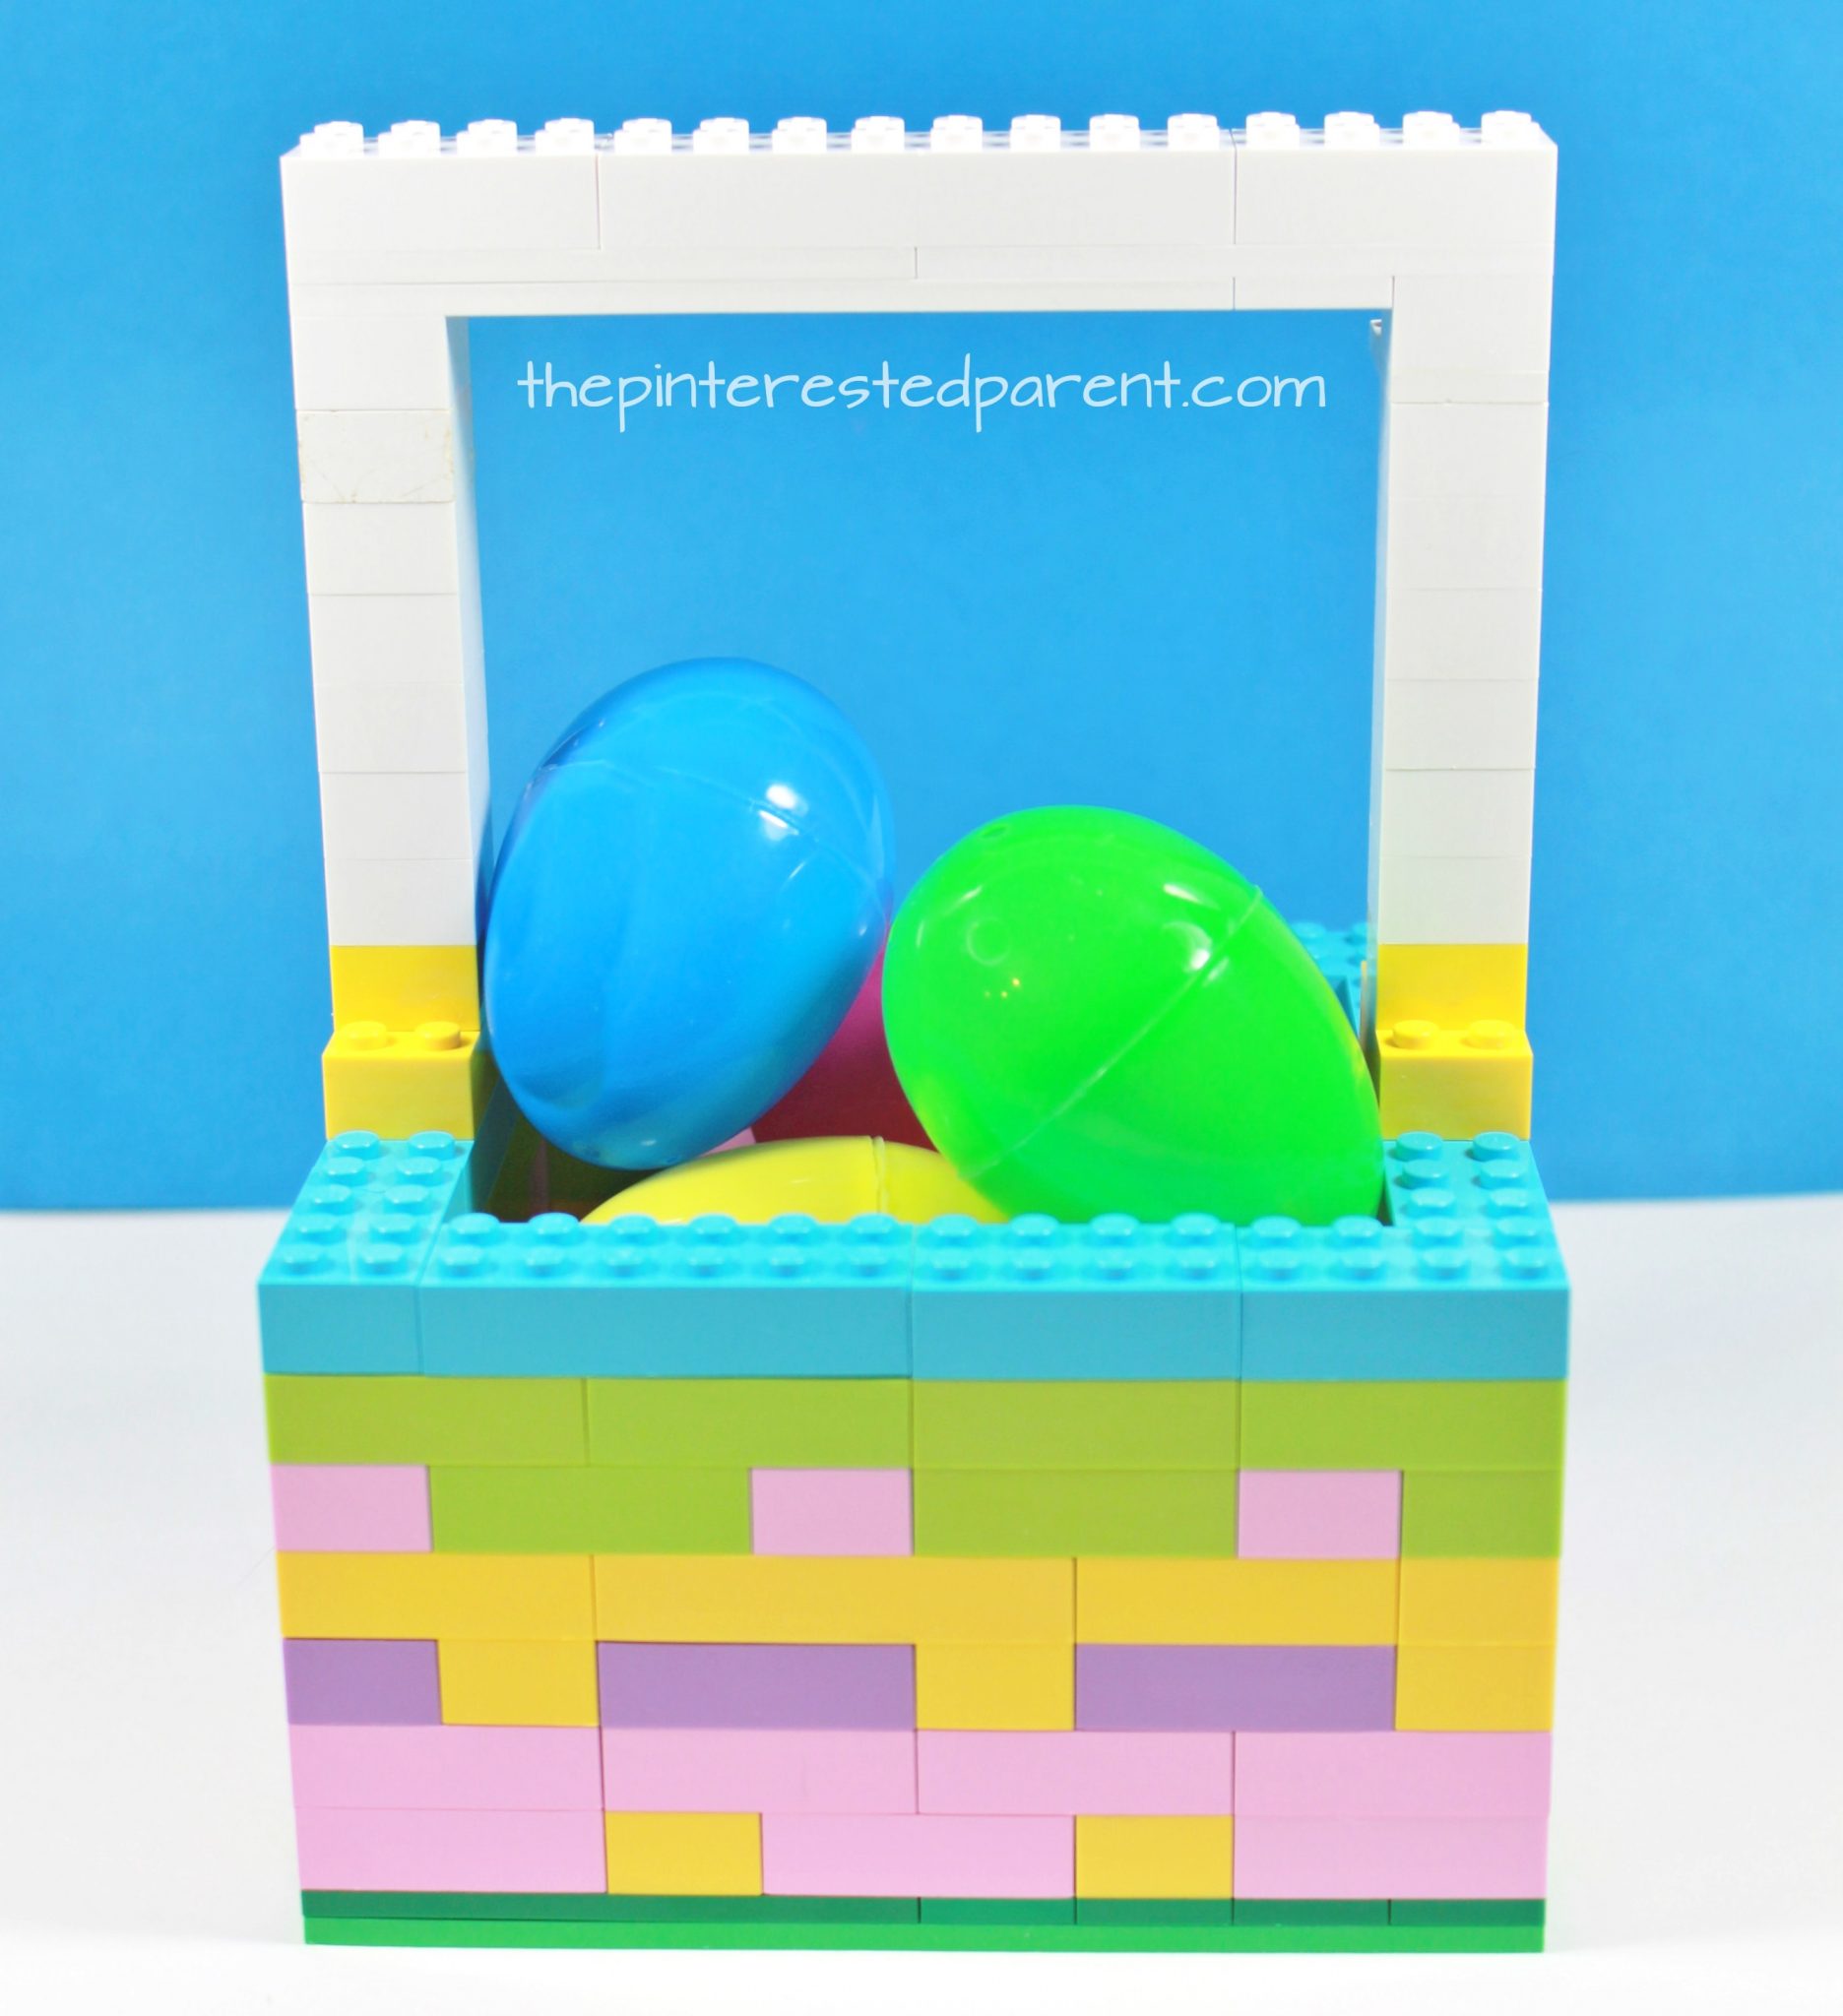 Lego Easter basket - a great gift idea or Lego build for the kids. Kid's arts and crafts